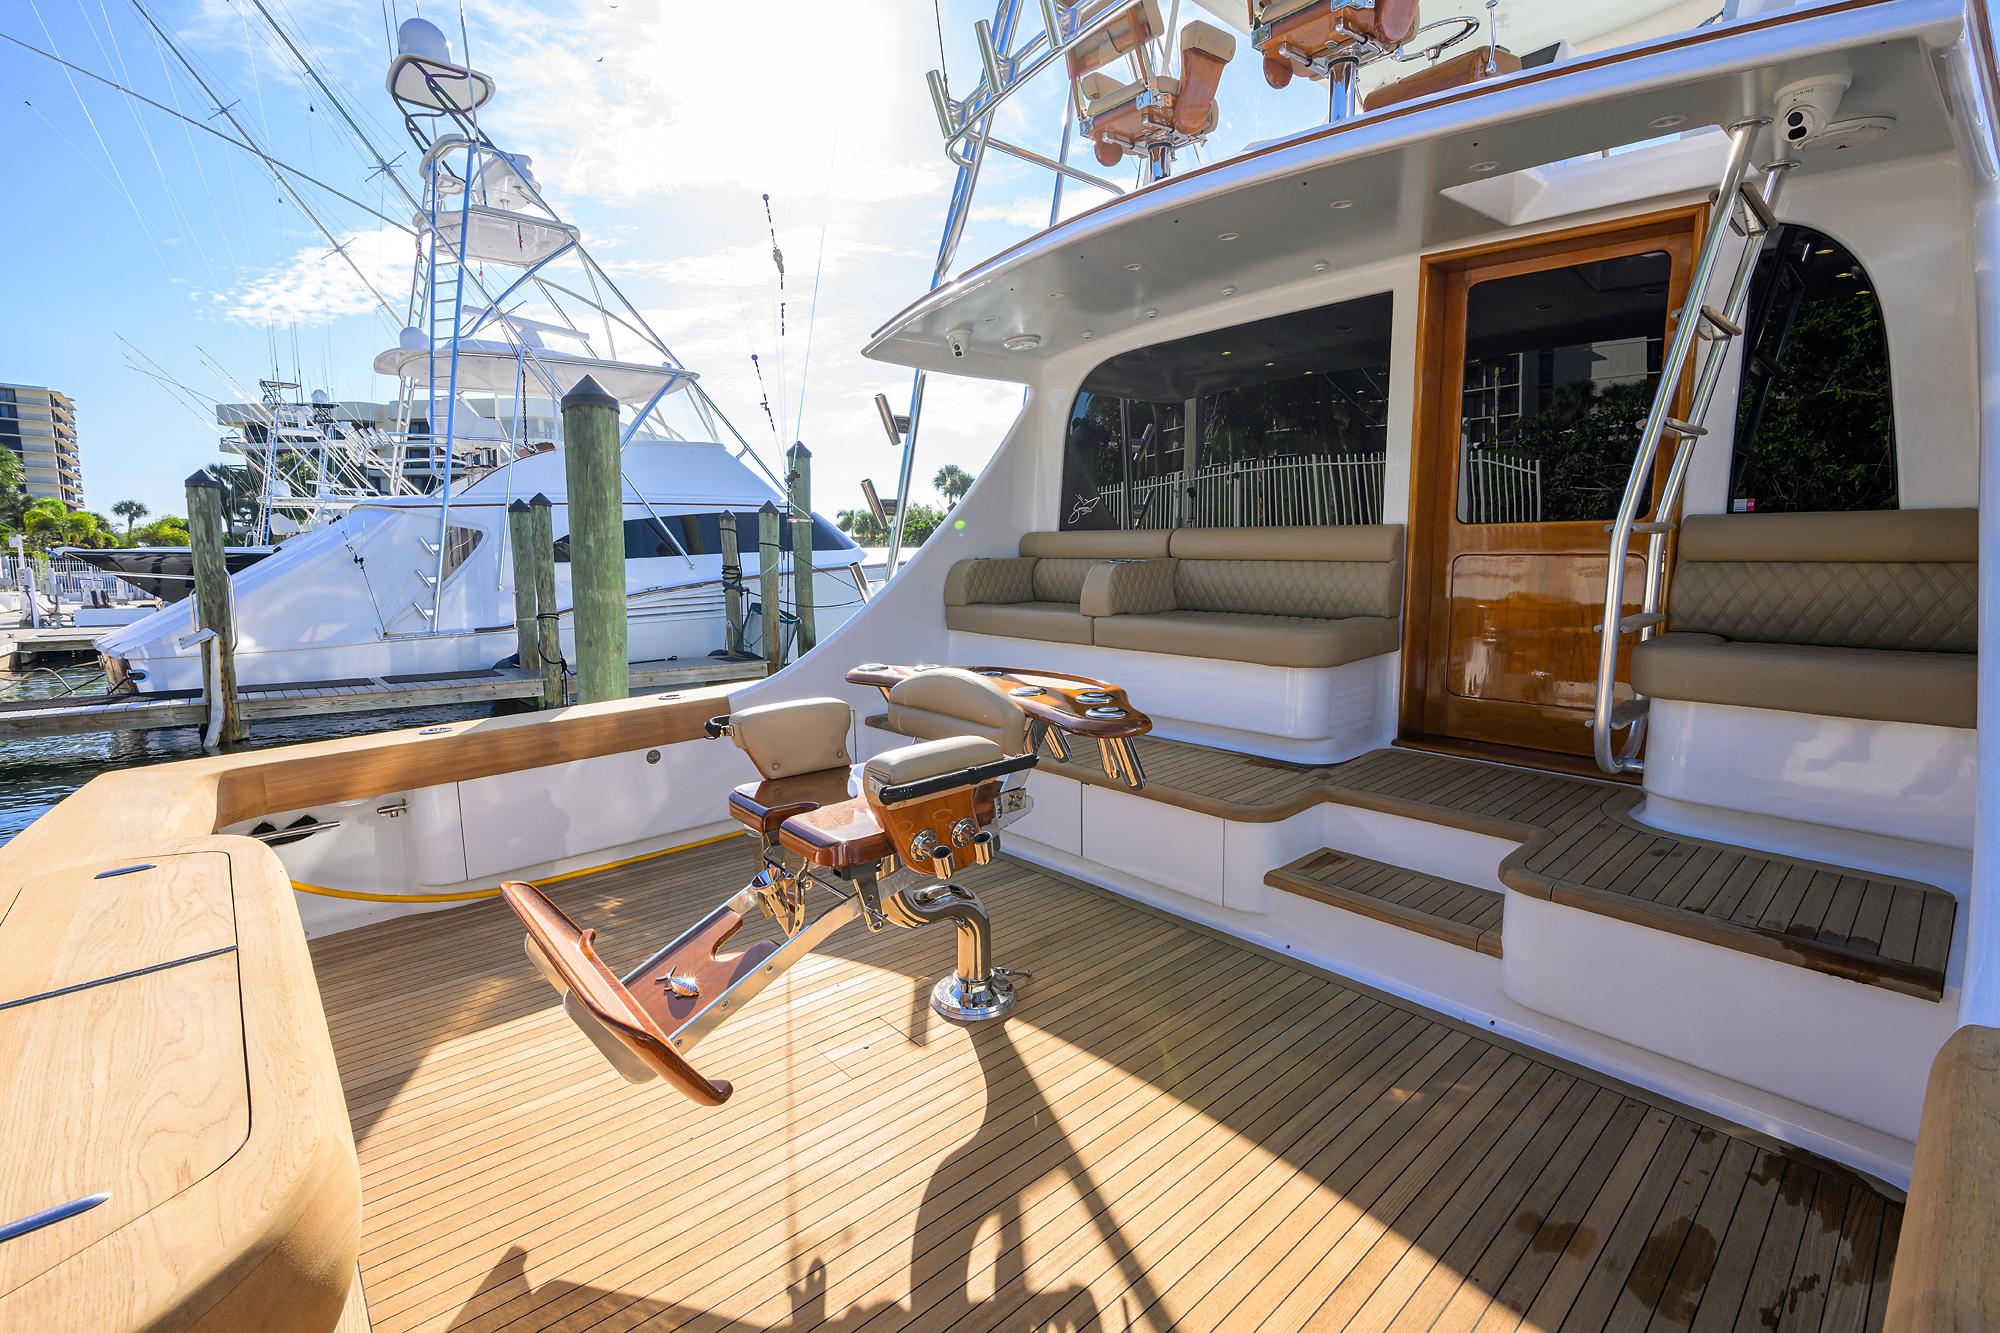 Sea Base Yacht for Sale, 60 Spencer Yachts Tequesta, FL